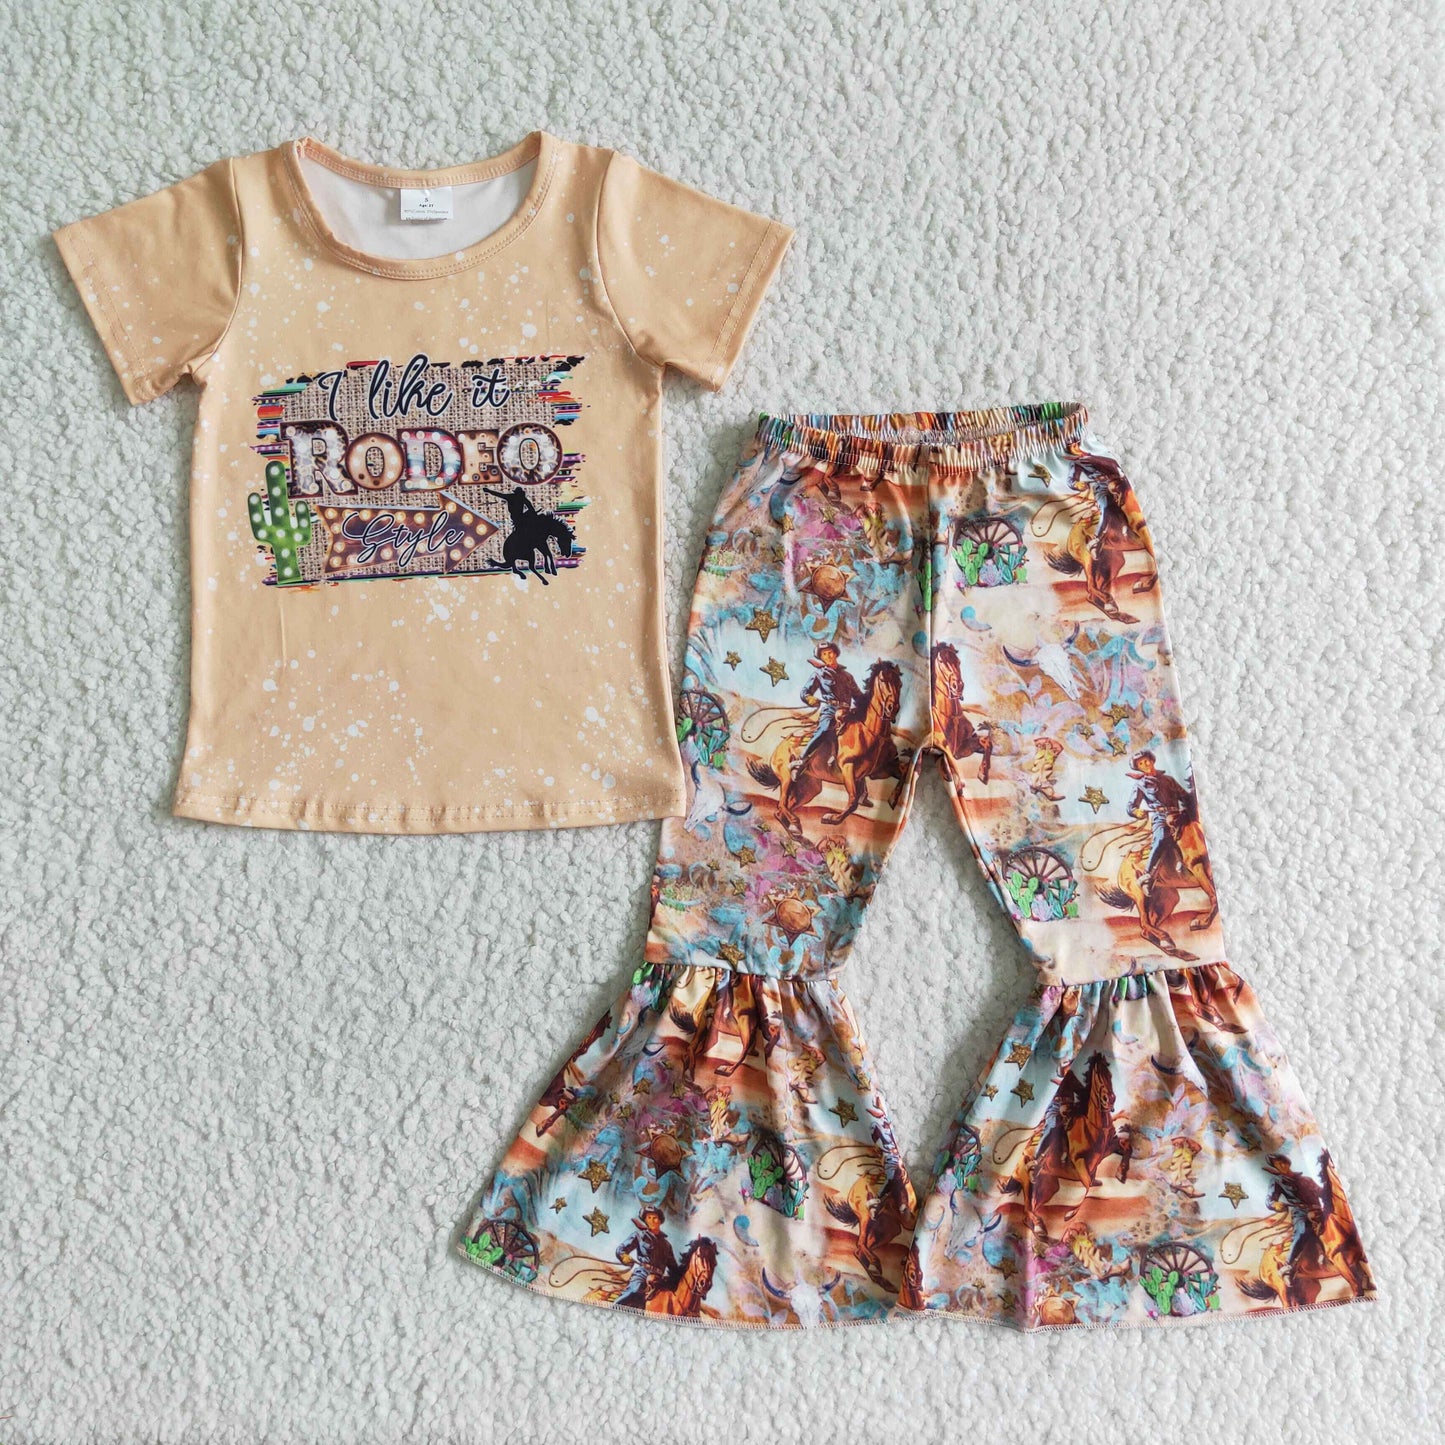 Rodeo shirt horse pants girls western clothes